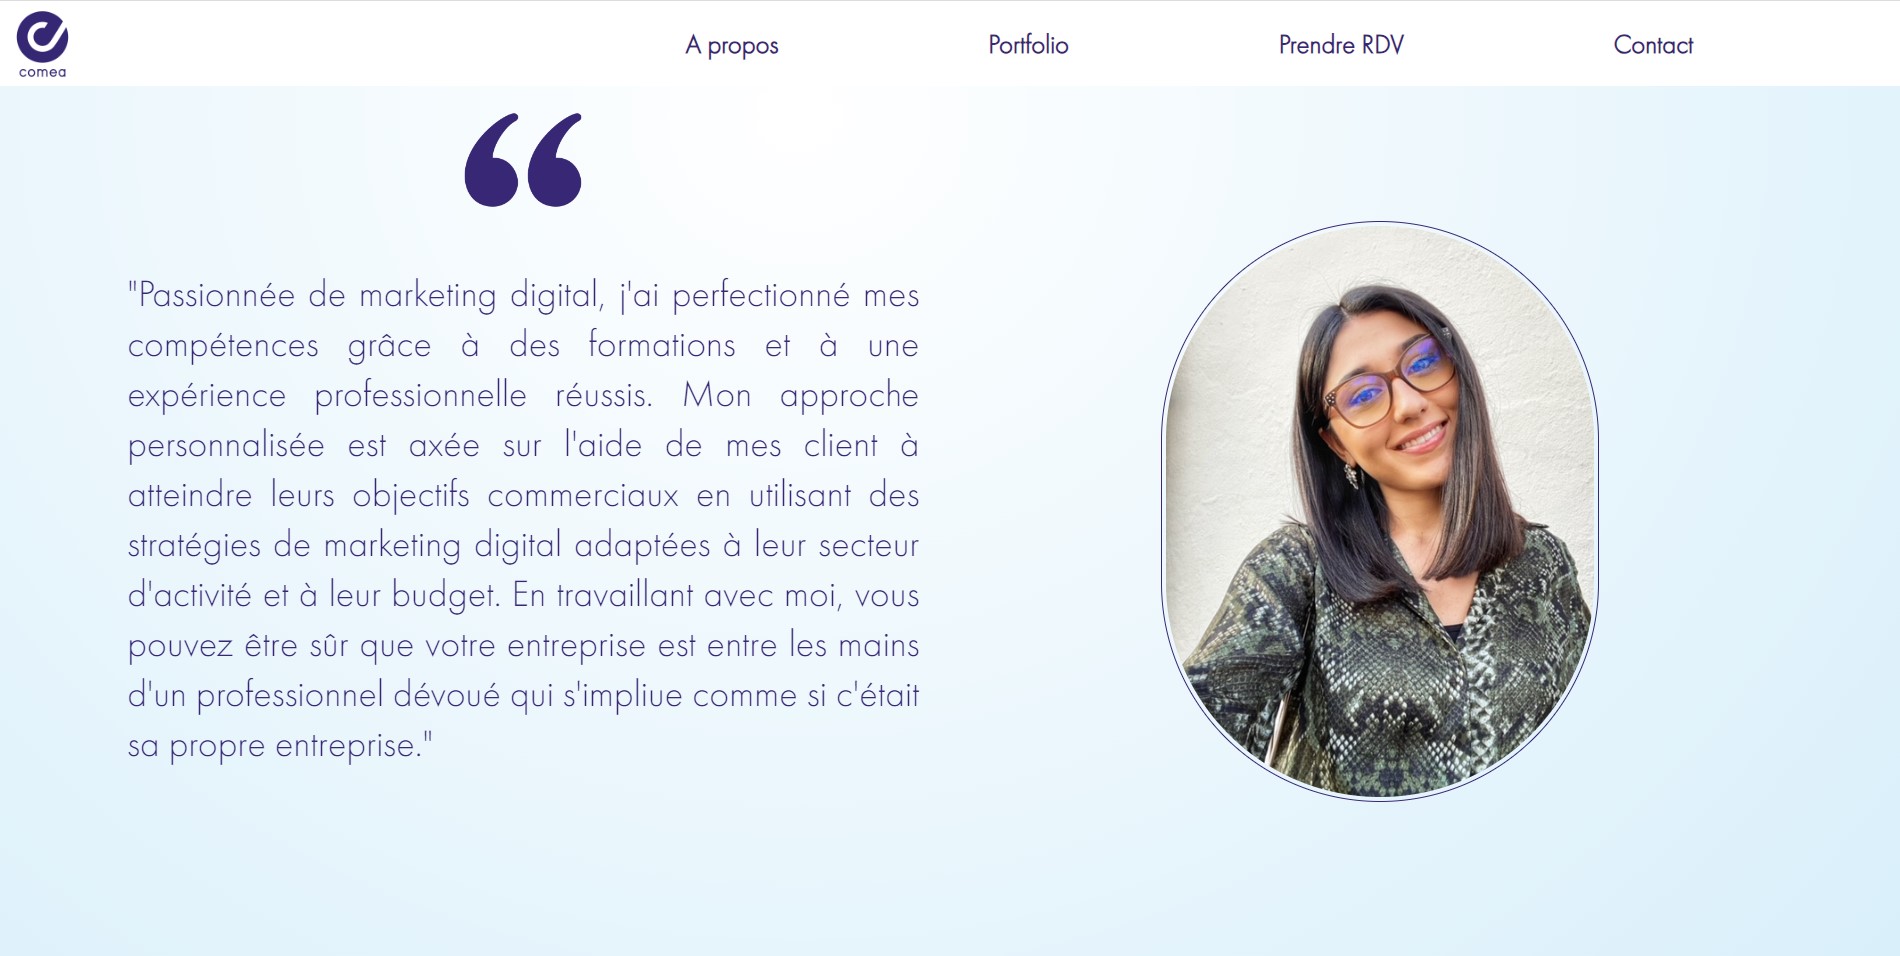 site agence opia